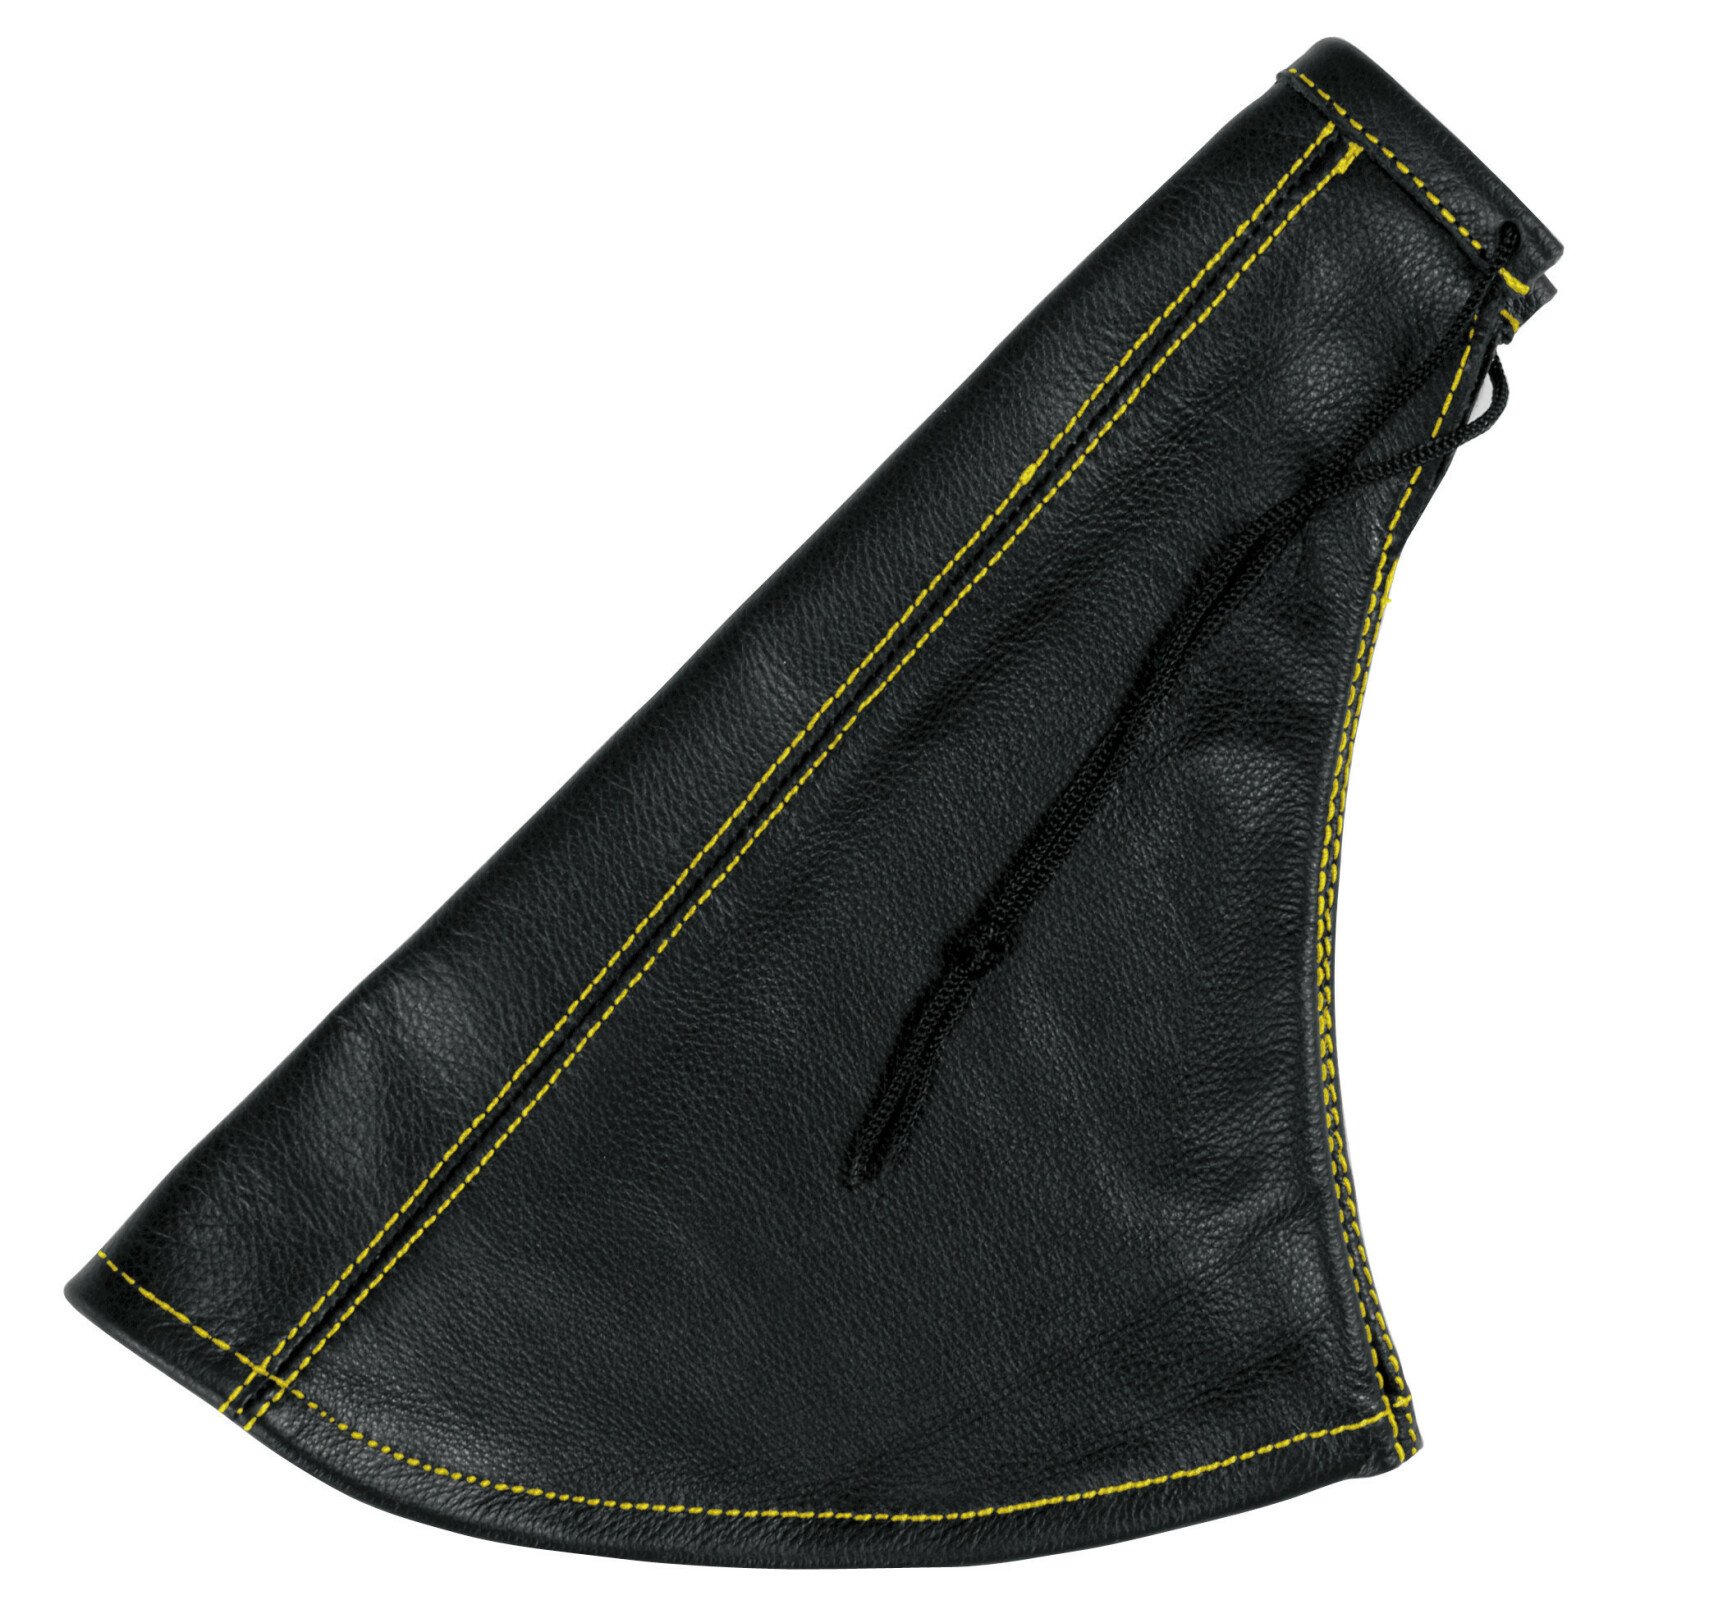 Exclusive leather central handbrake boot - Black/Yellow thumb